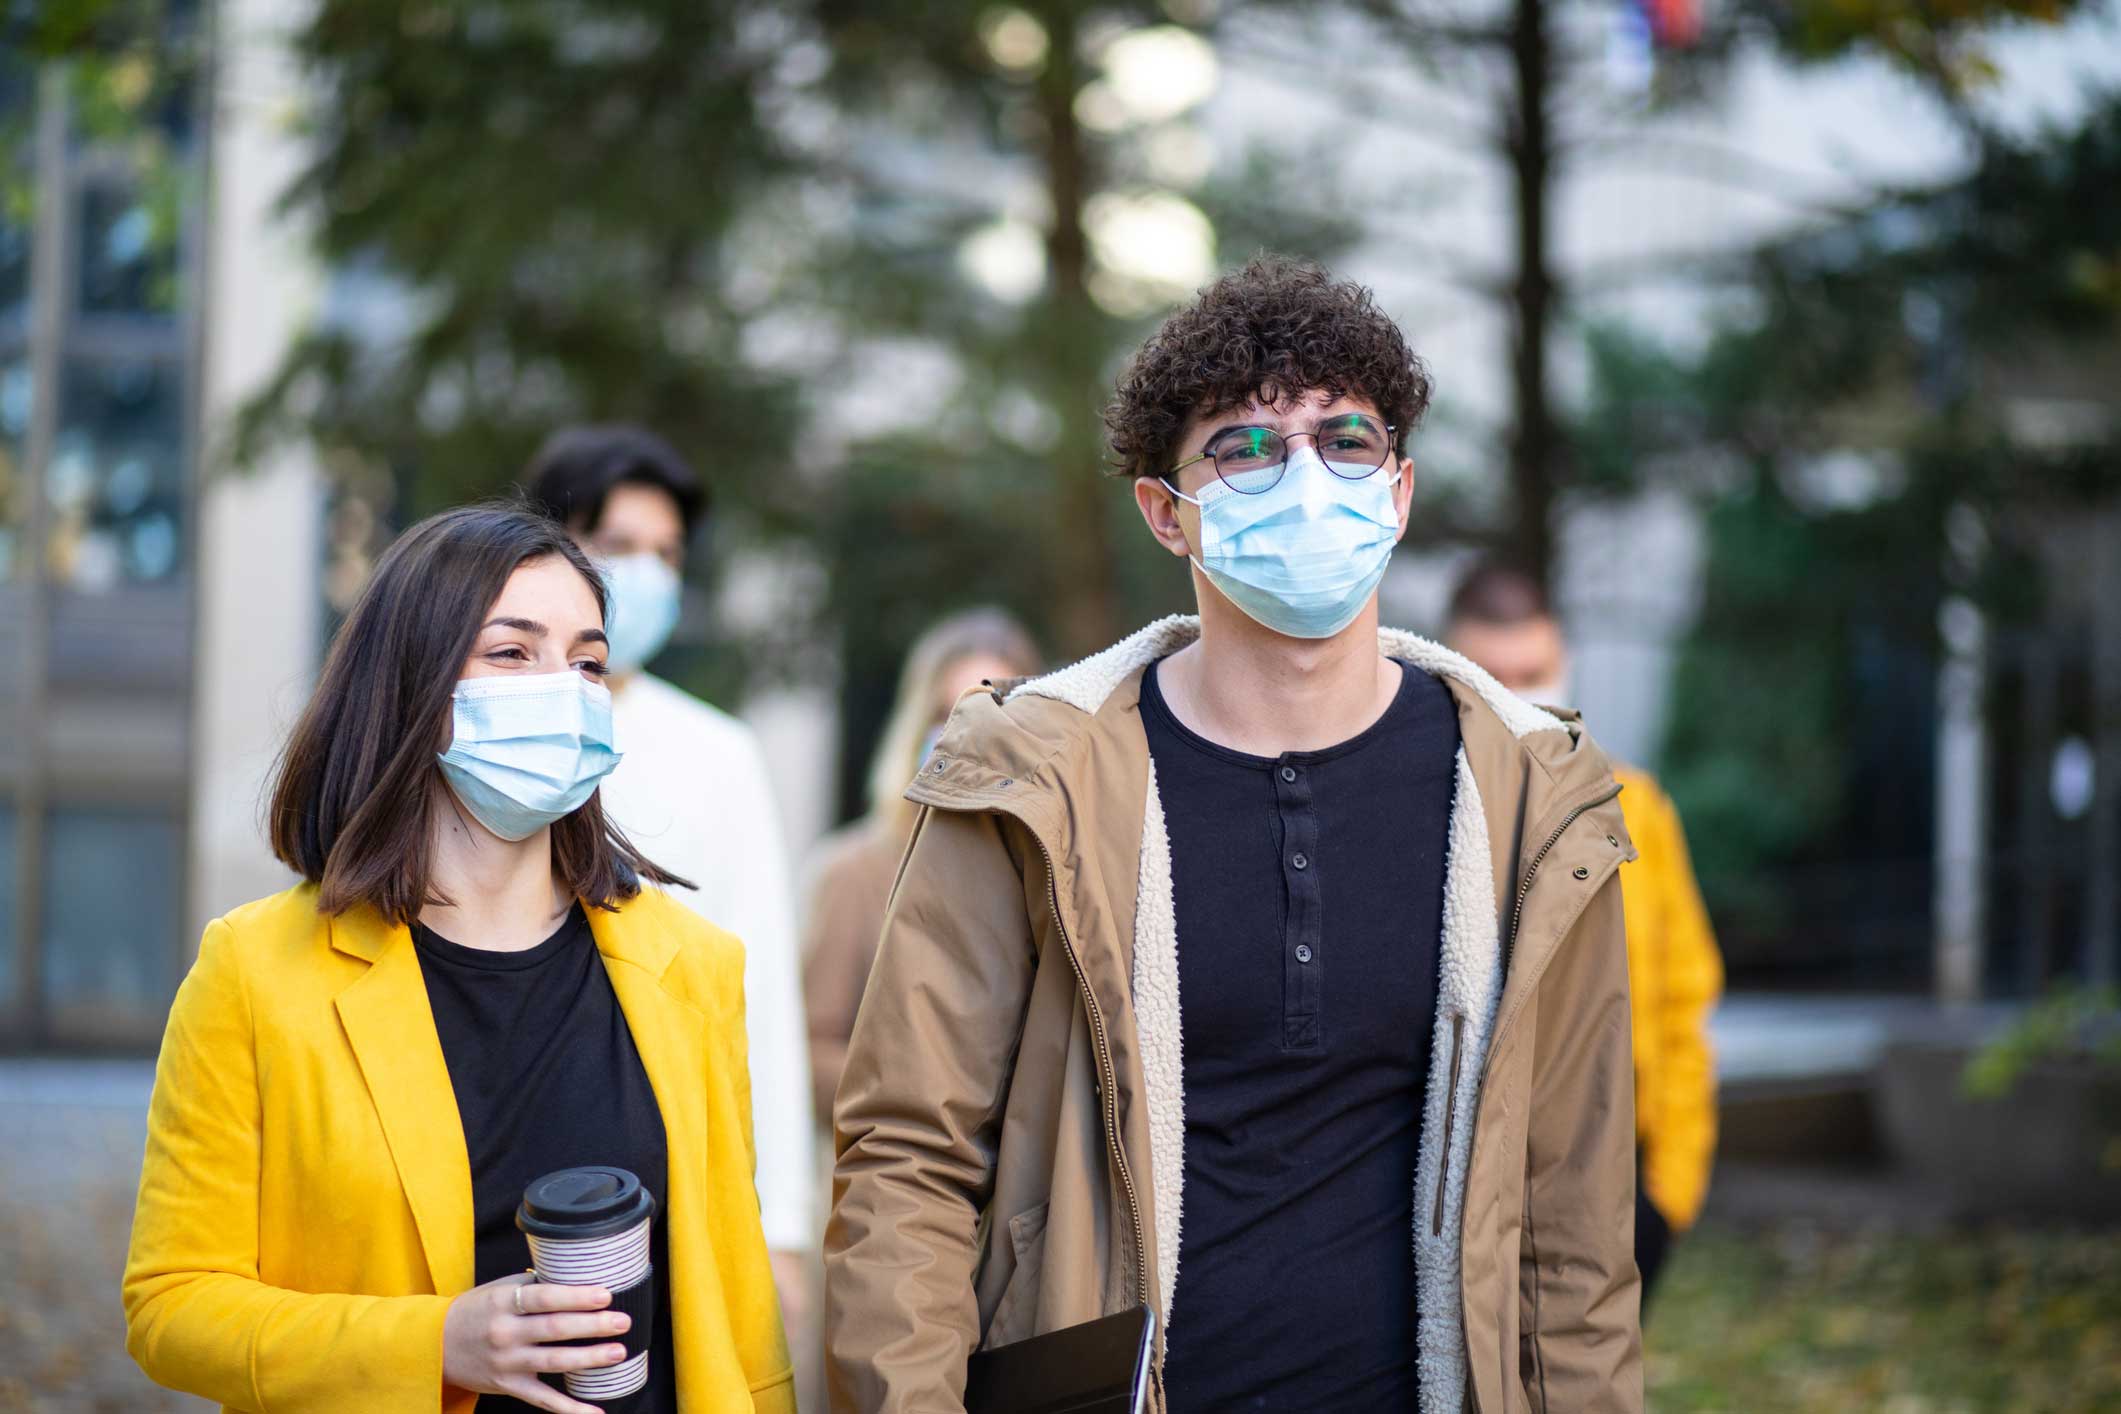 Male and female students wearing masks